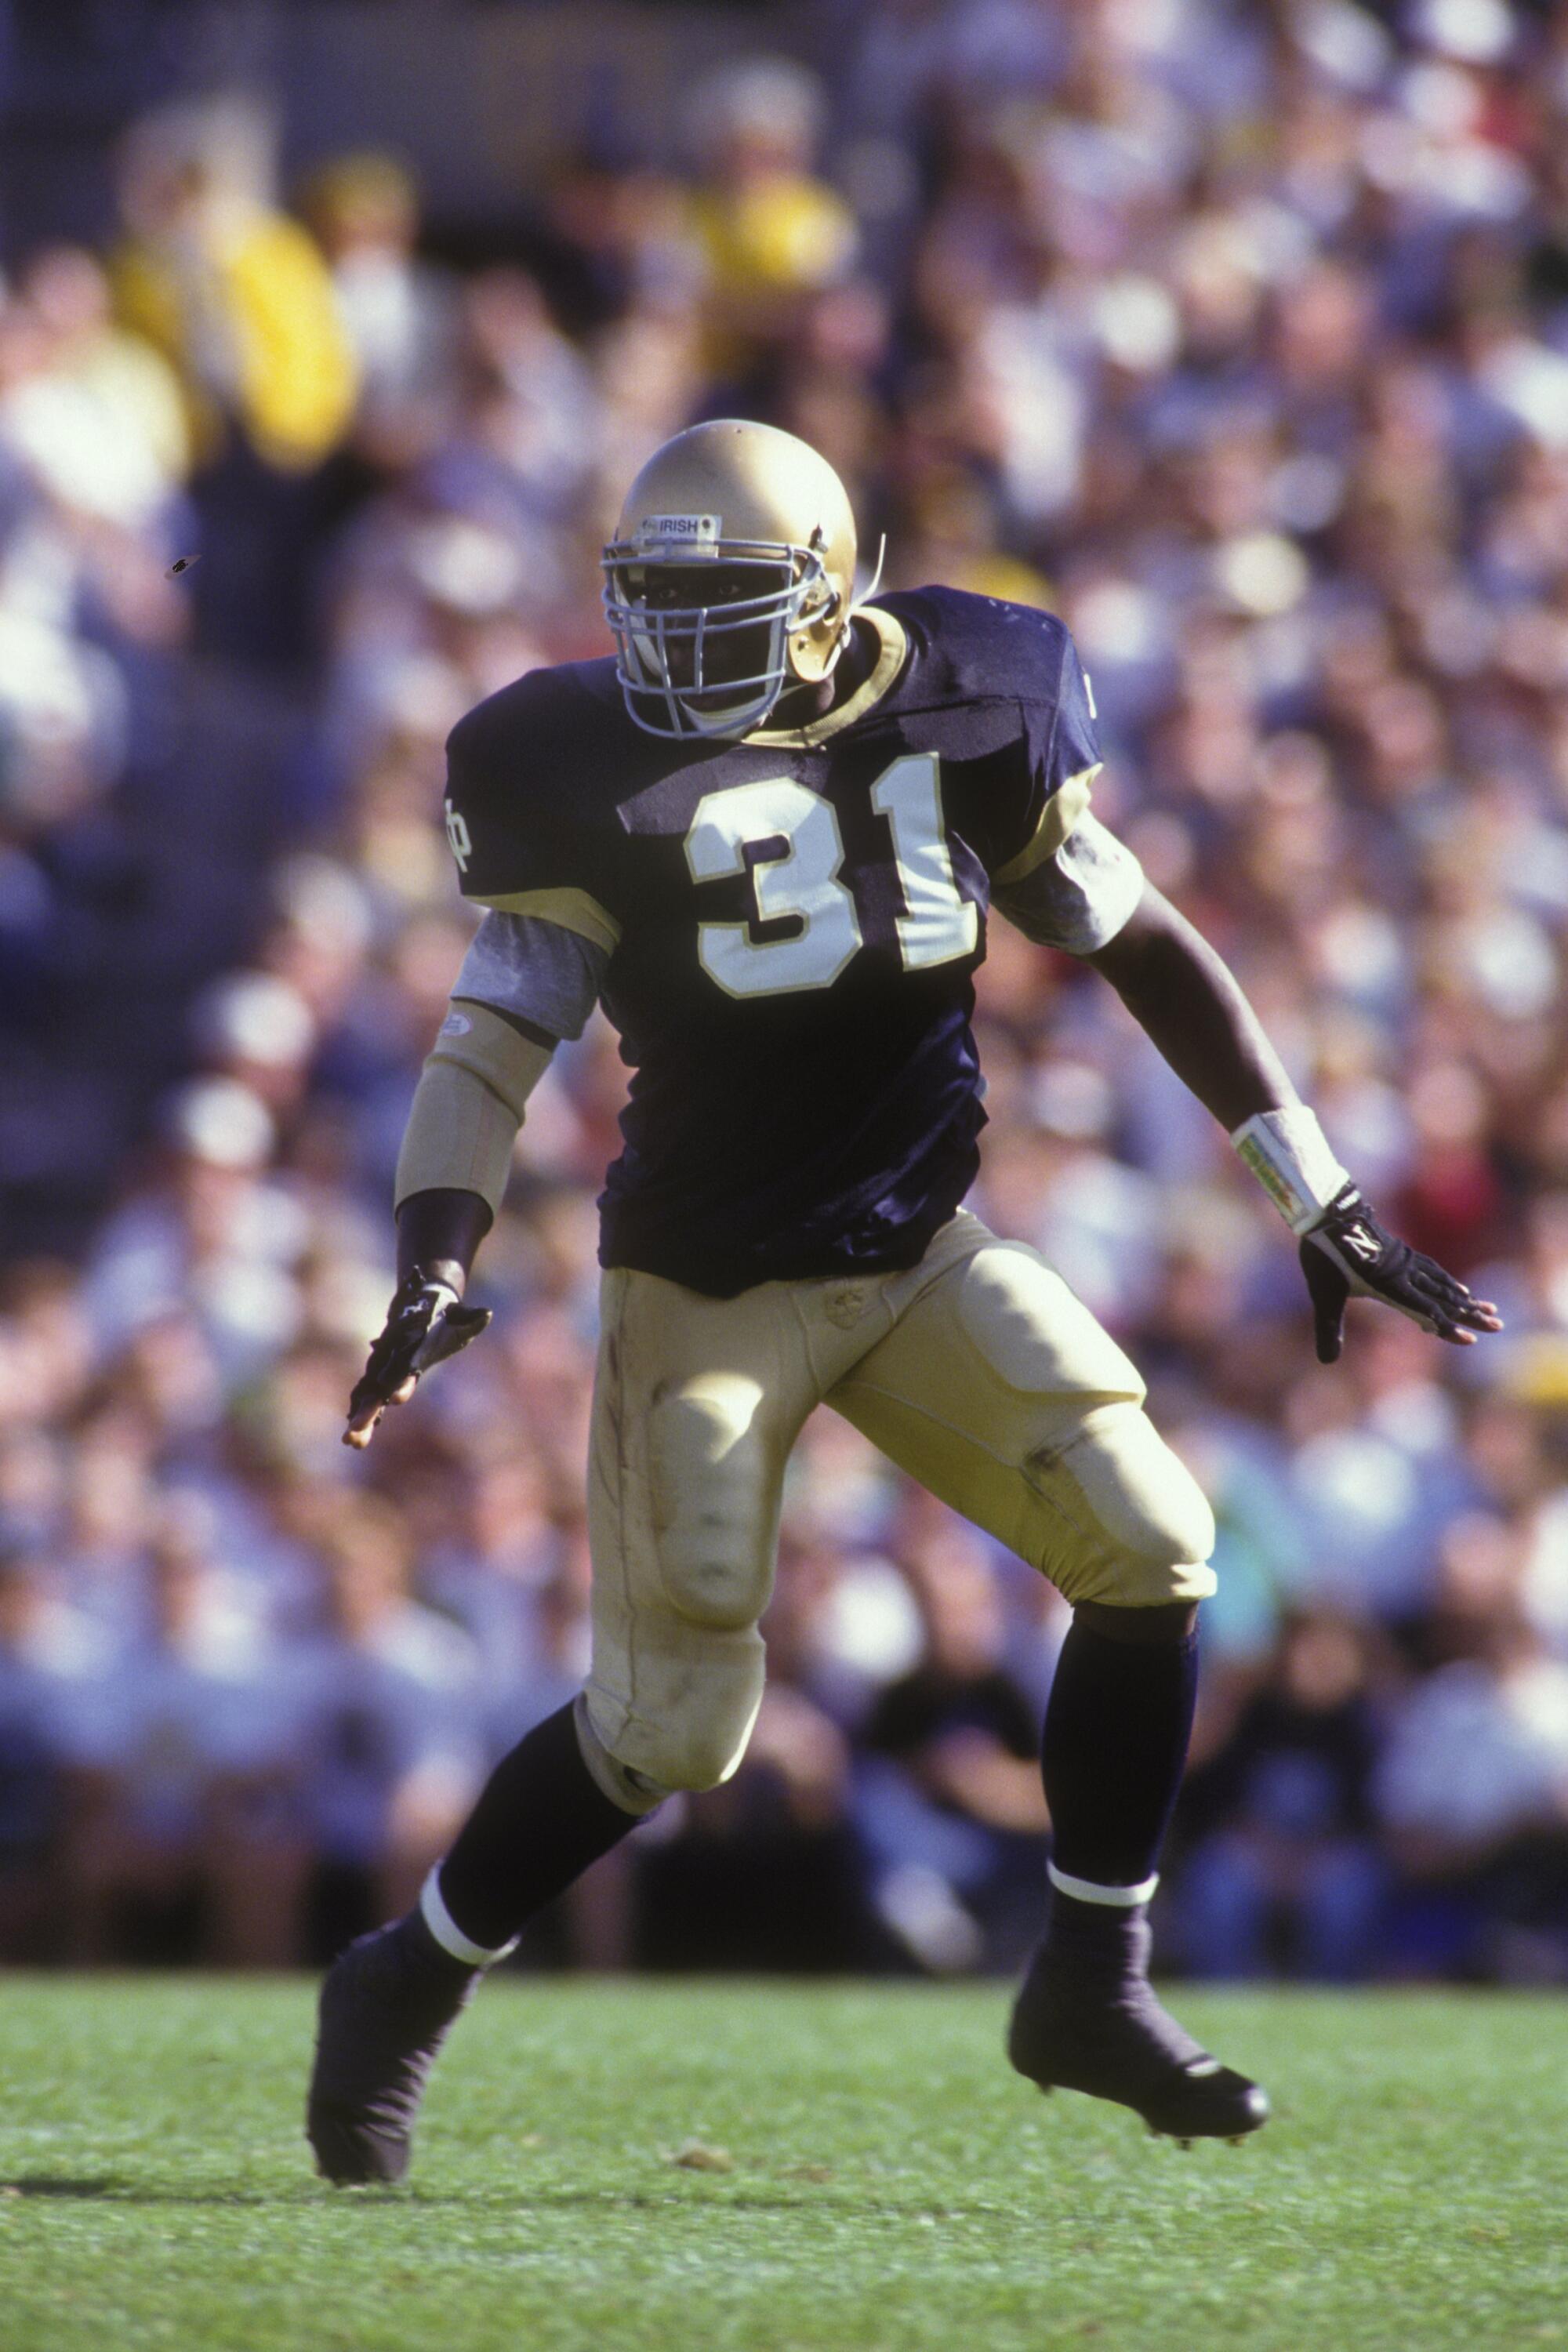 Demetrius DuBose playing defense for Notre Dame in 1992